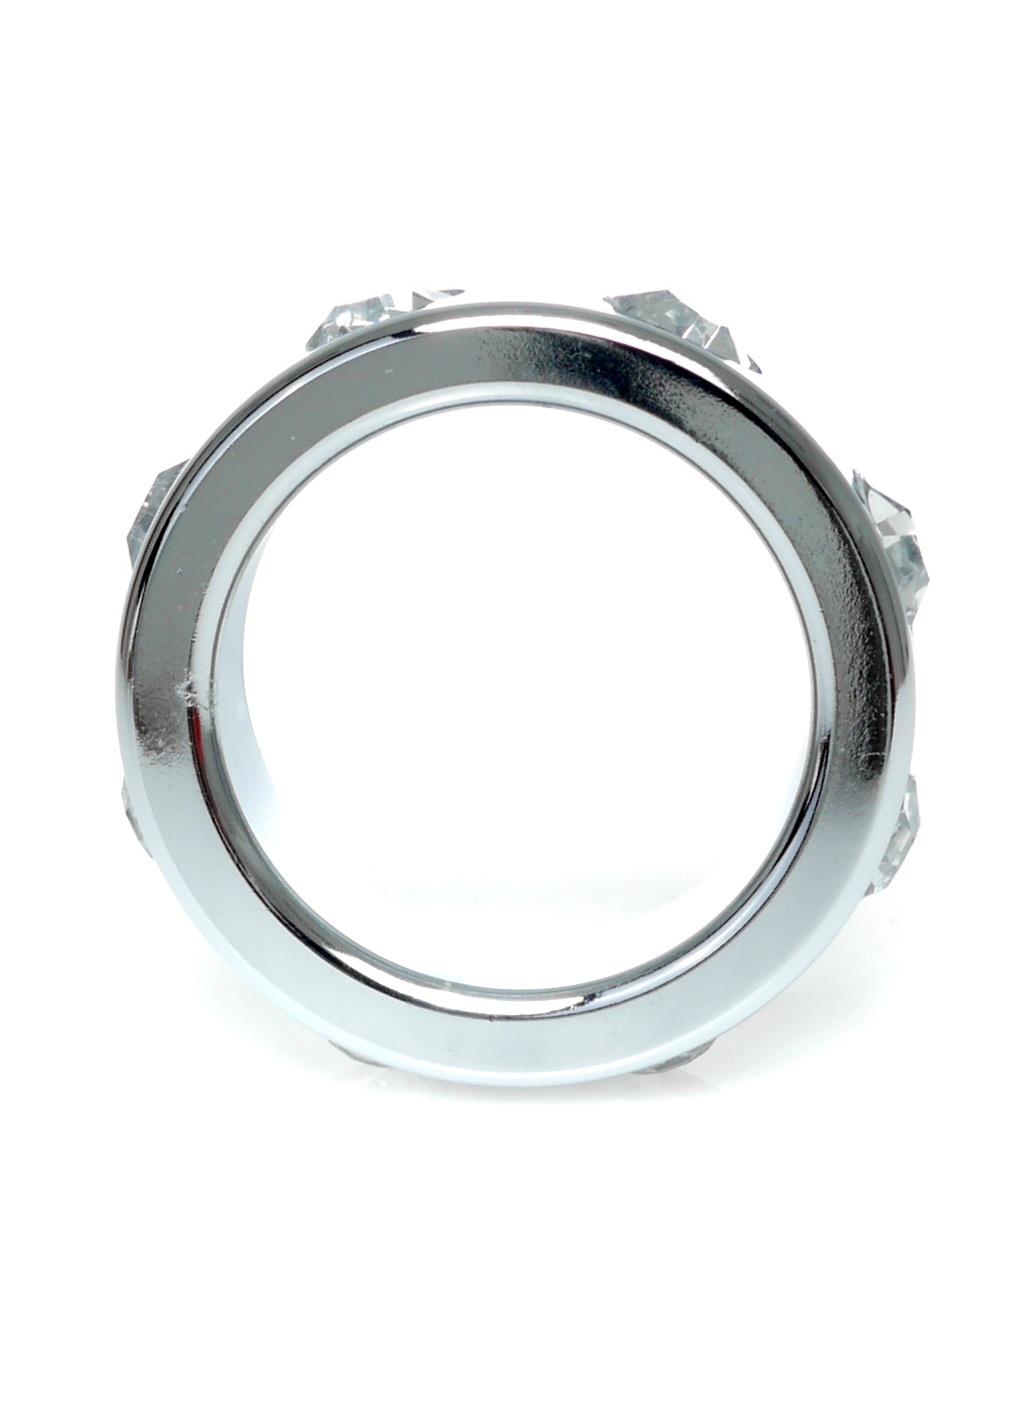 Bossoftoys - 64-00117 - Stainless steel - Metal Cockring  - with White Diamond stones - Small size - inner dia 3,5 CM - outer dia 4,5 CM